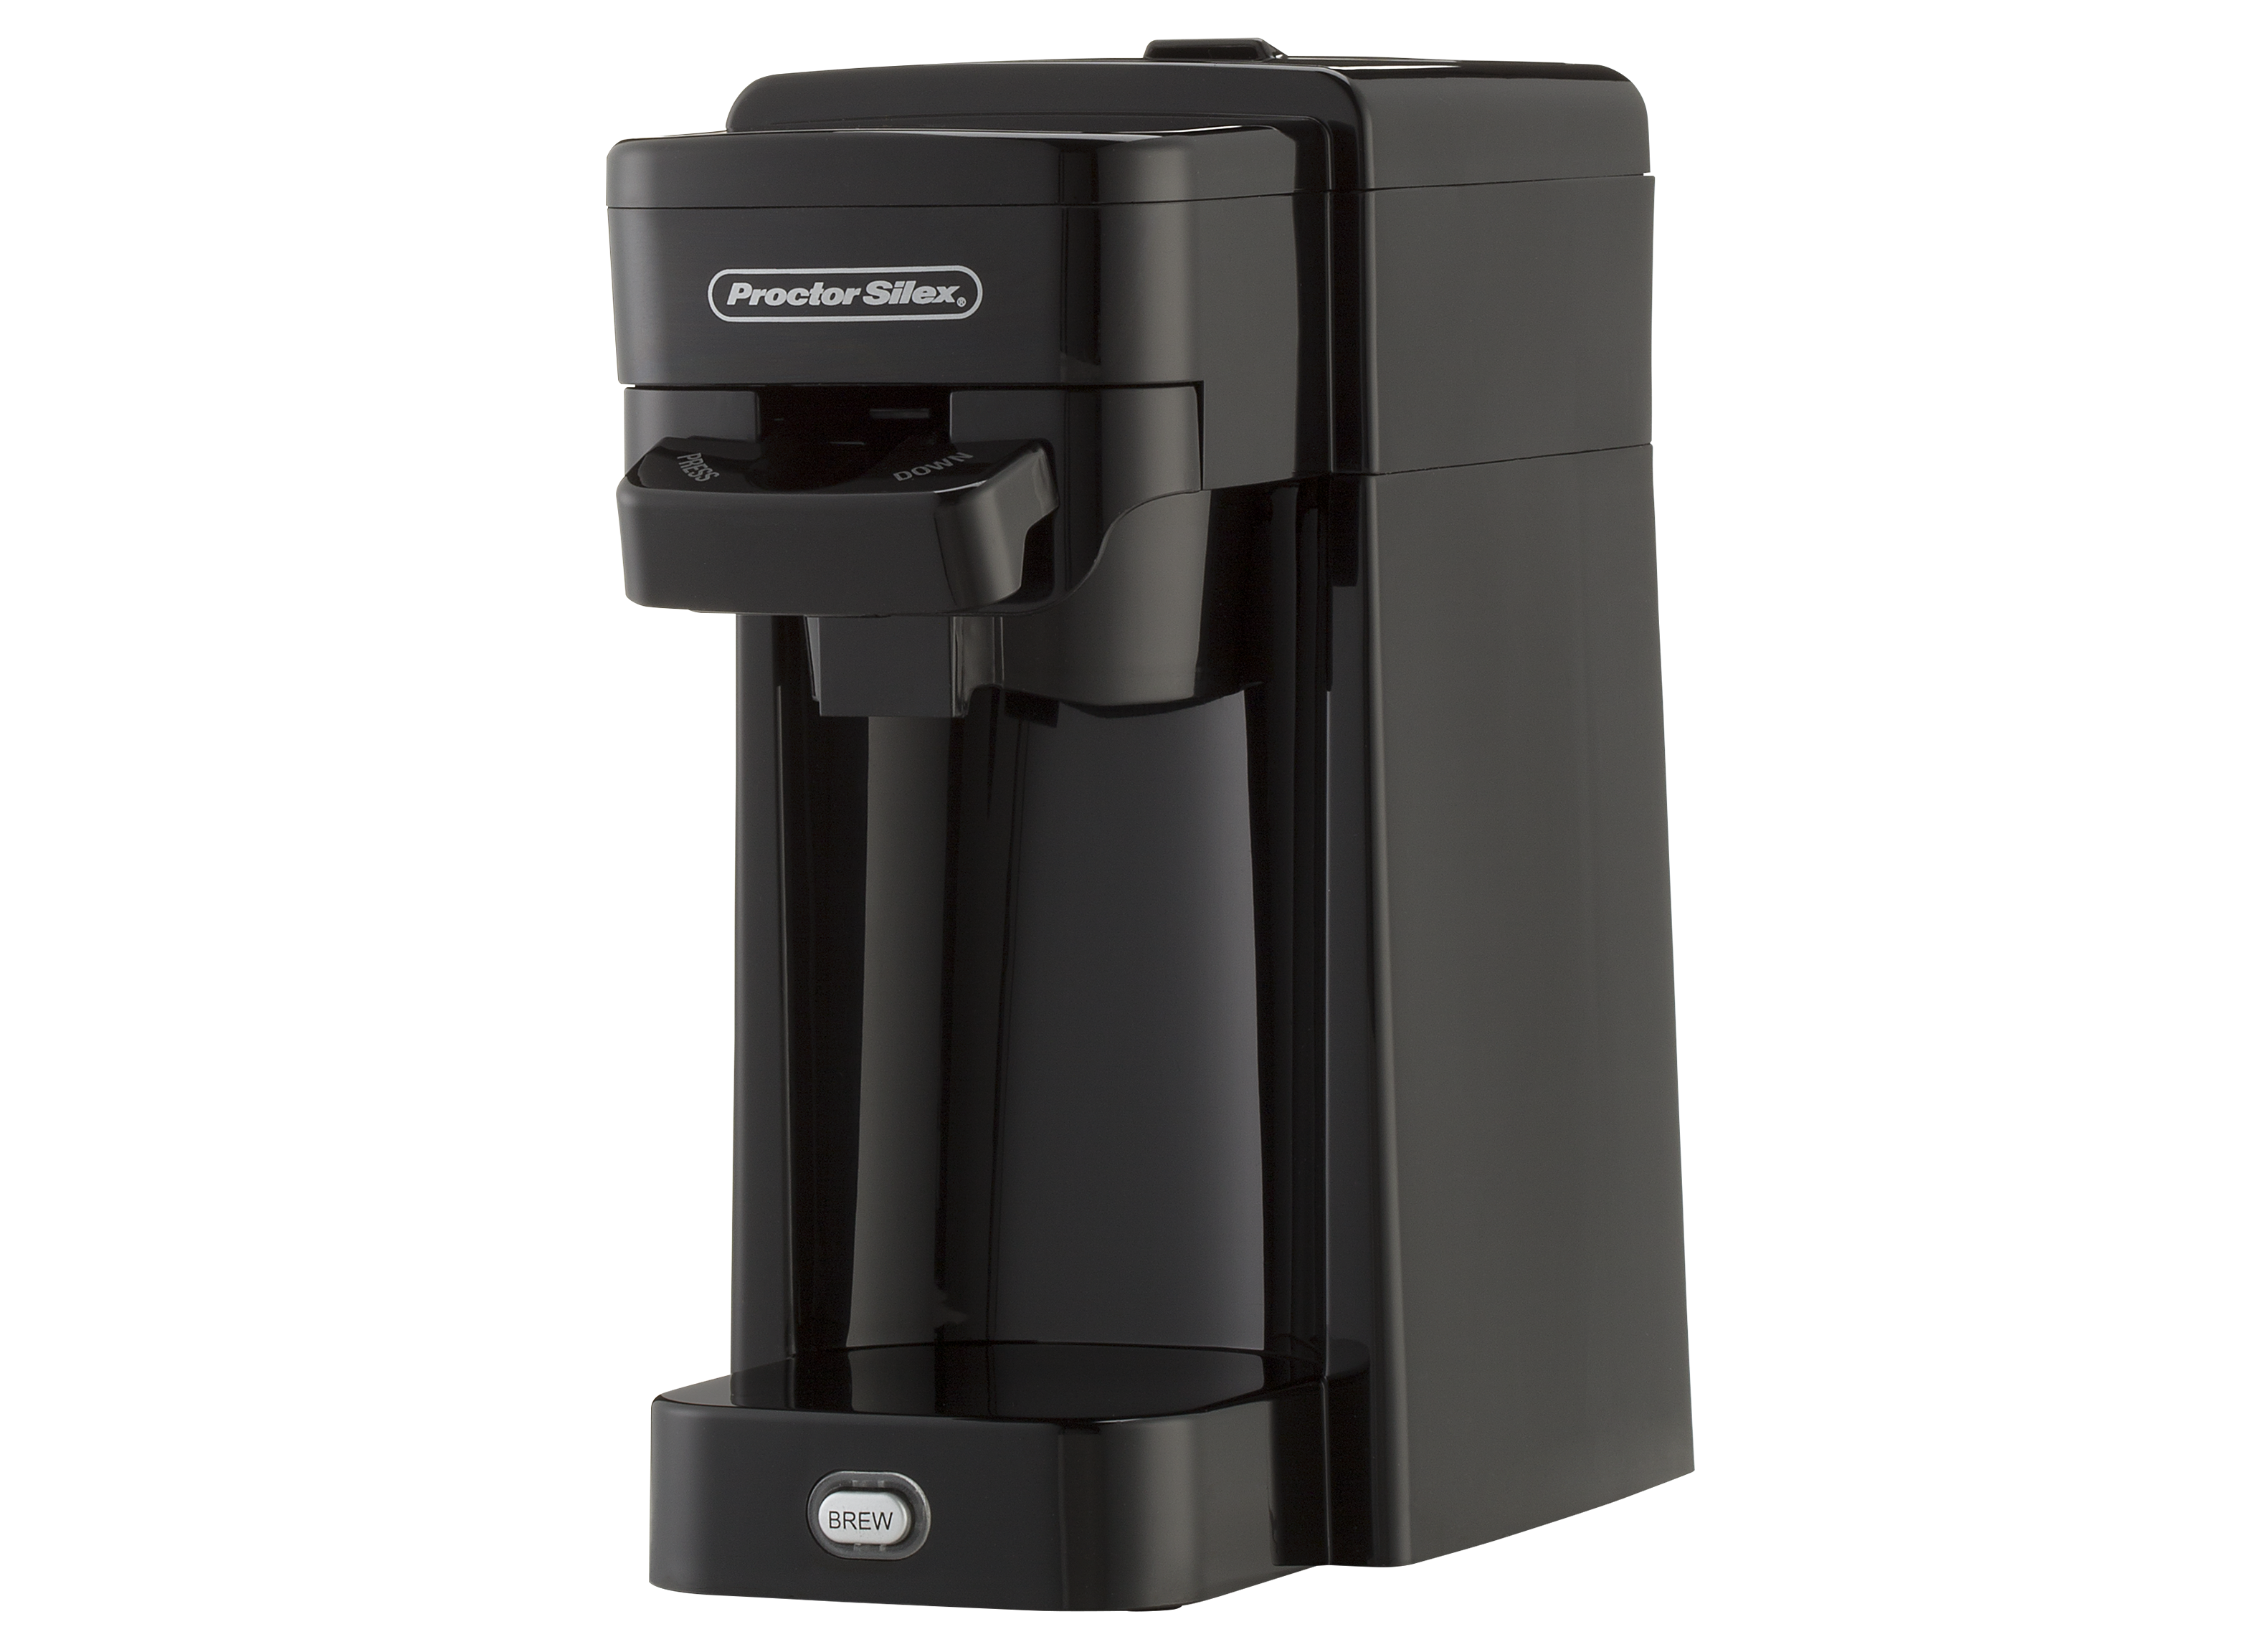 https://crdms.images.consumerreports.org/prod/products/cr/models/384641-coffeemakers-proctorsilex-singleserve49961.png